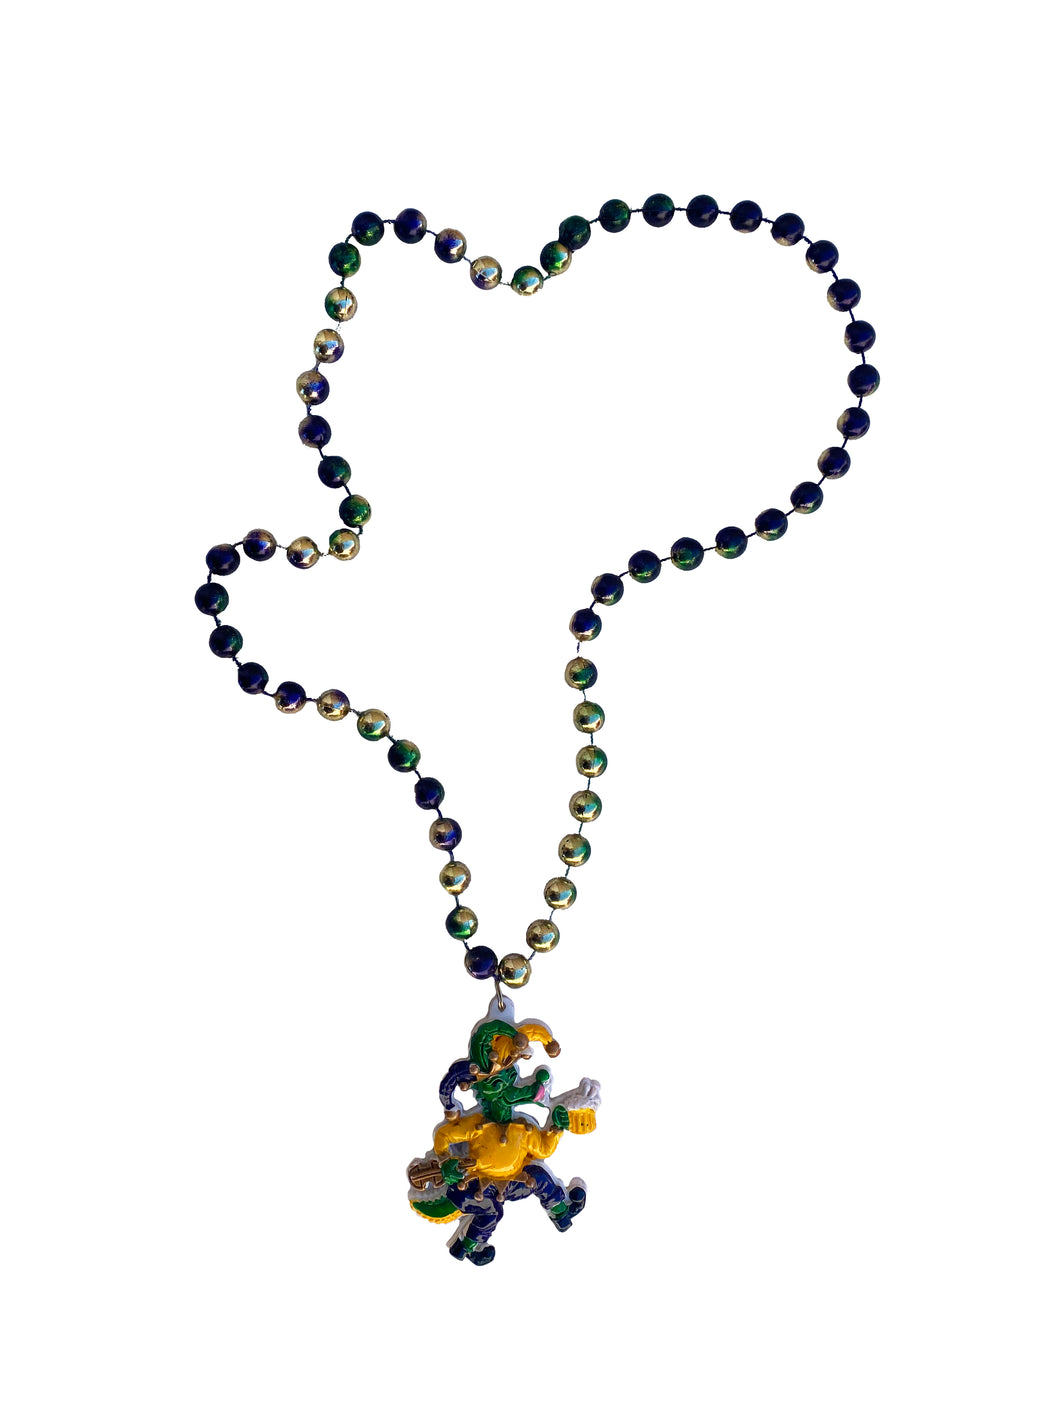 Jester Alligator Medallion on Purple, Green, and Gold Specialty Bead